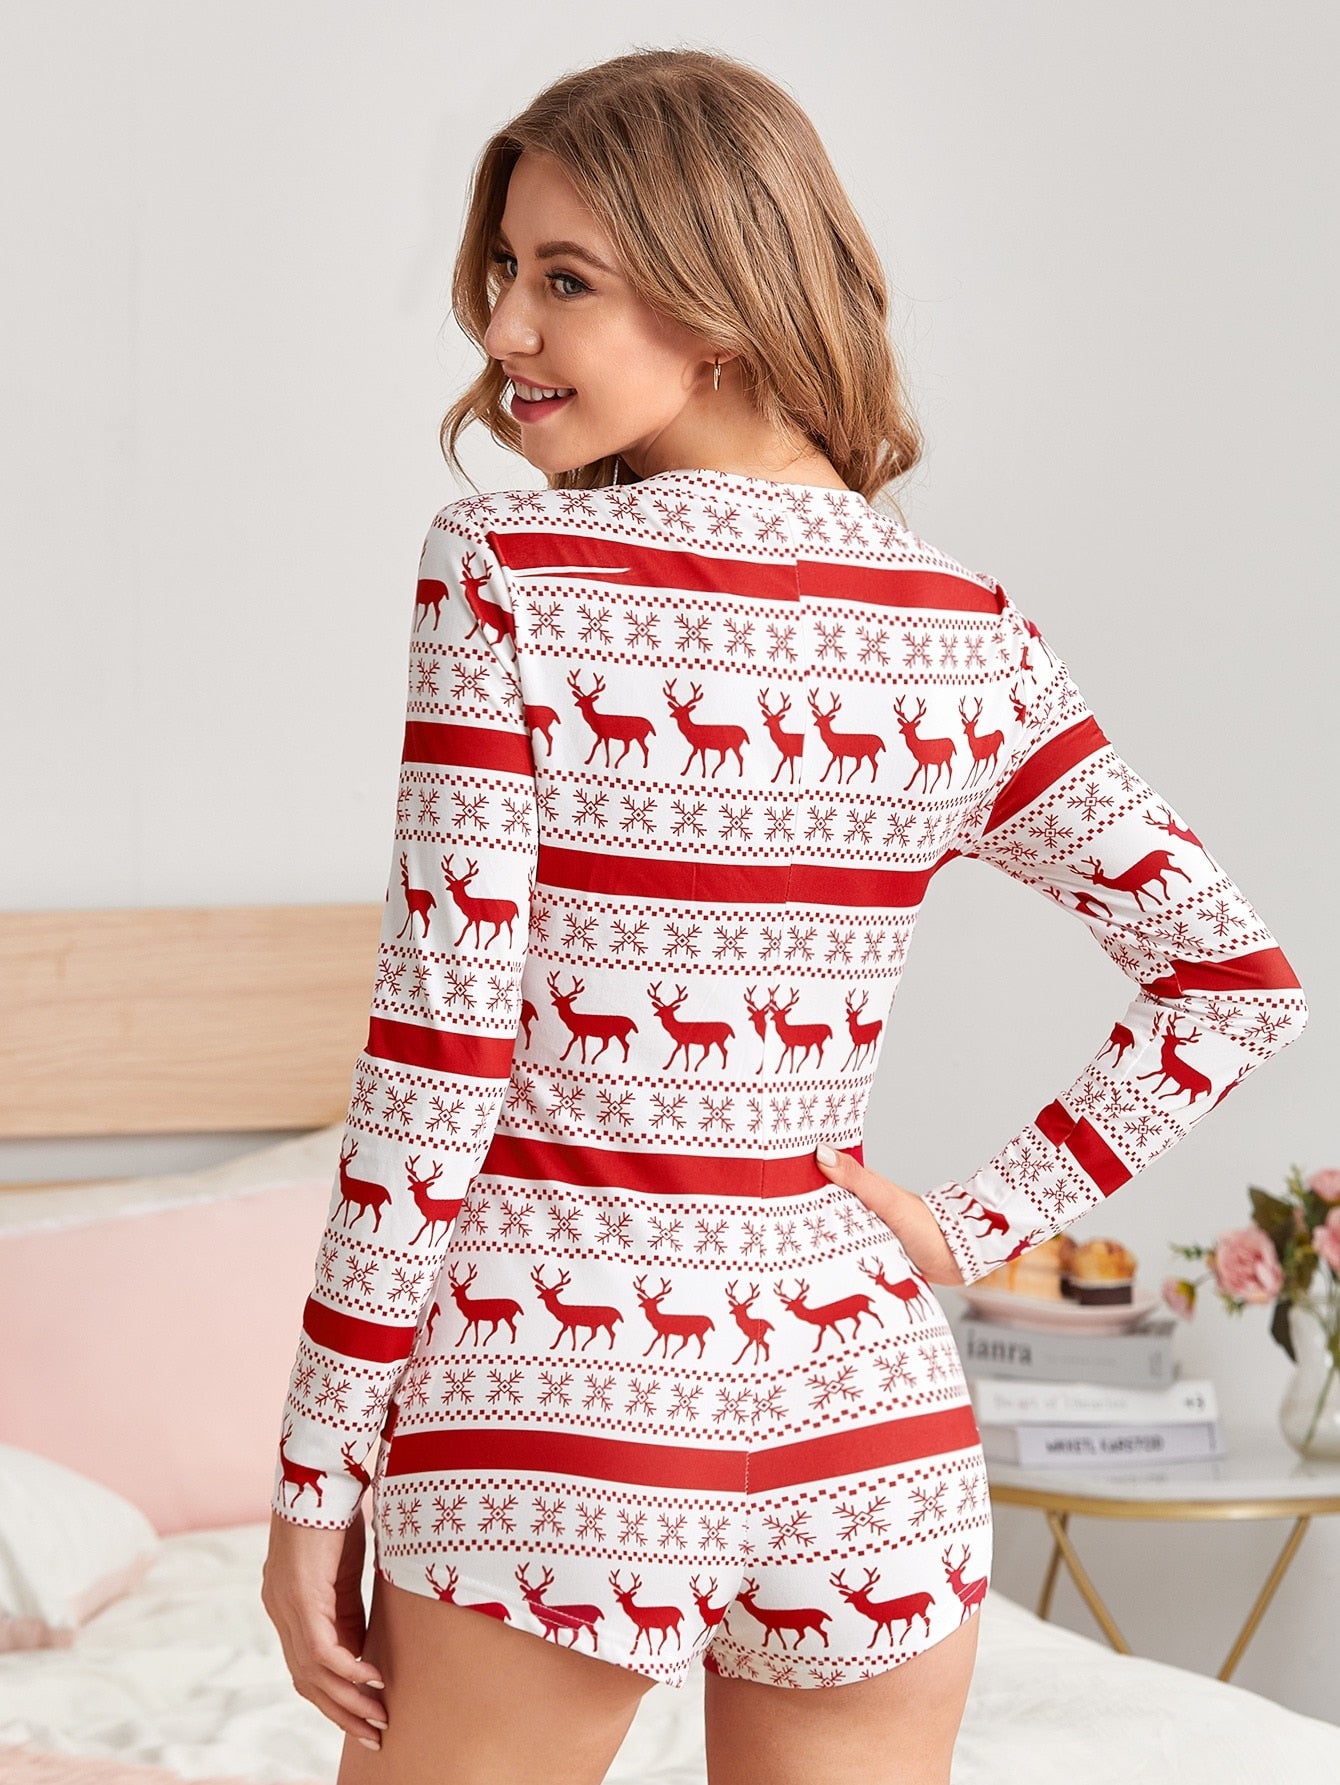 Christmas Printed Pattern Pajama Suit Soft And Comfortable Home Wear Hot Sale S-2XL